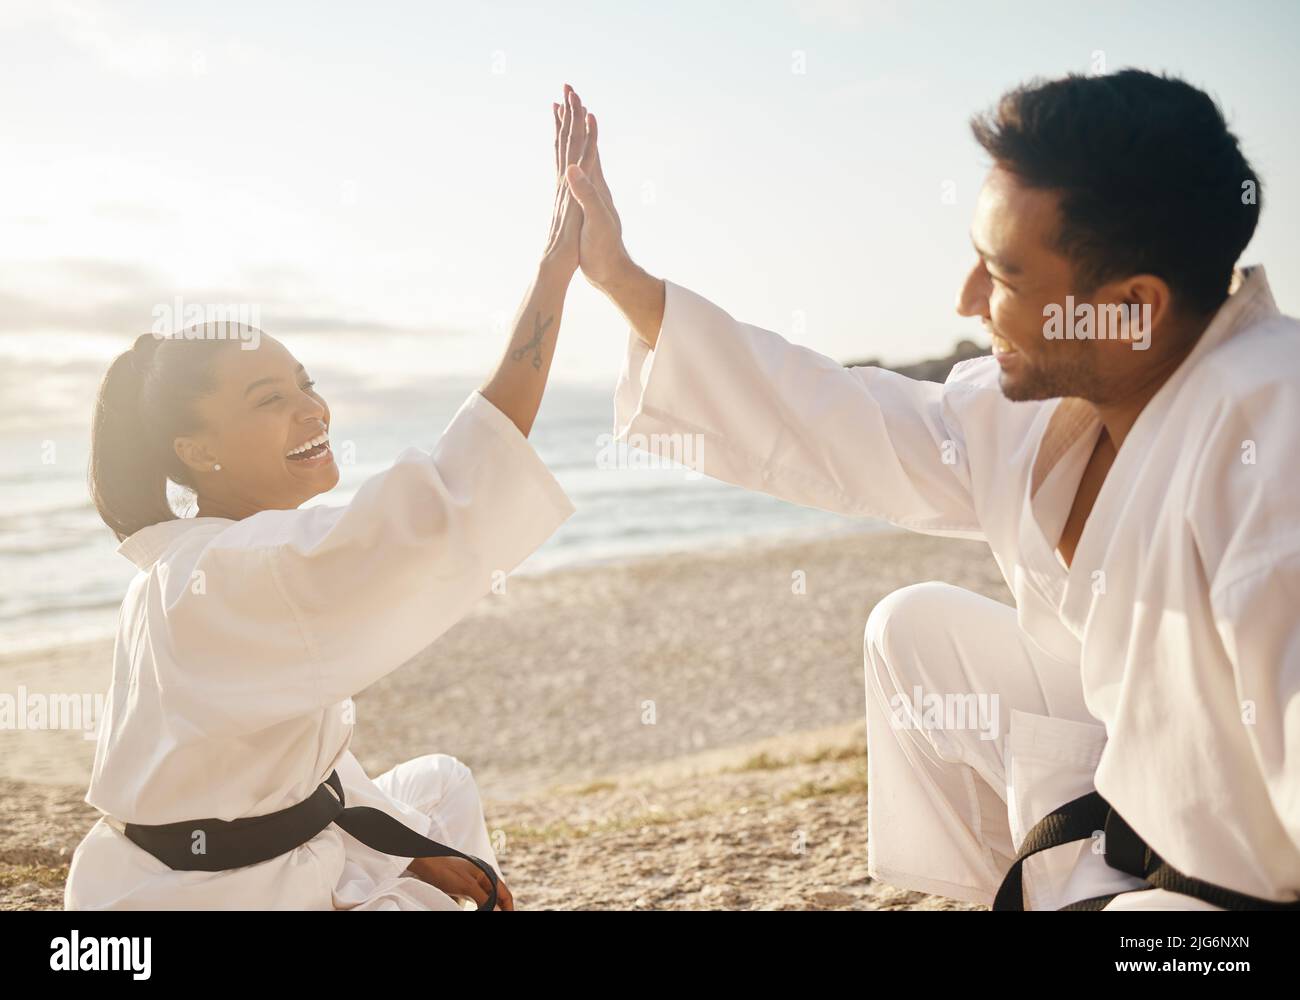 Concluding another successful sunset session. Shot of two young martial artists giving each other a high five while practicing karate on the beach. Stock Photo